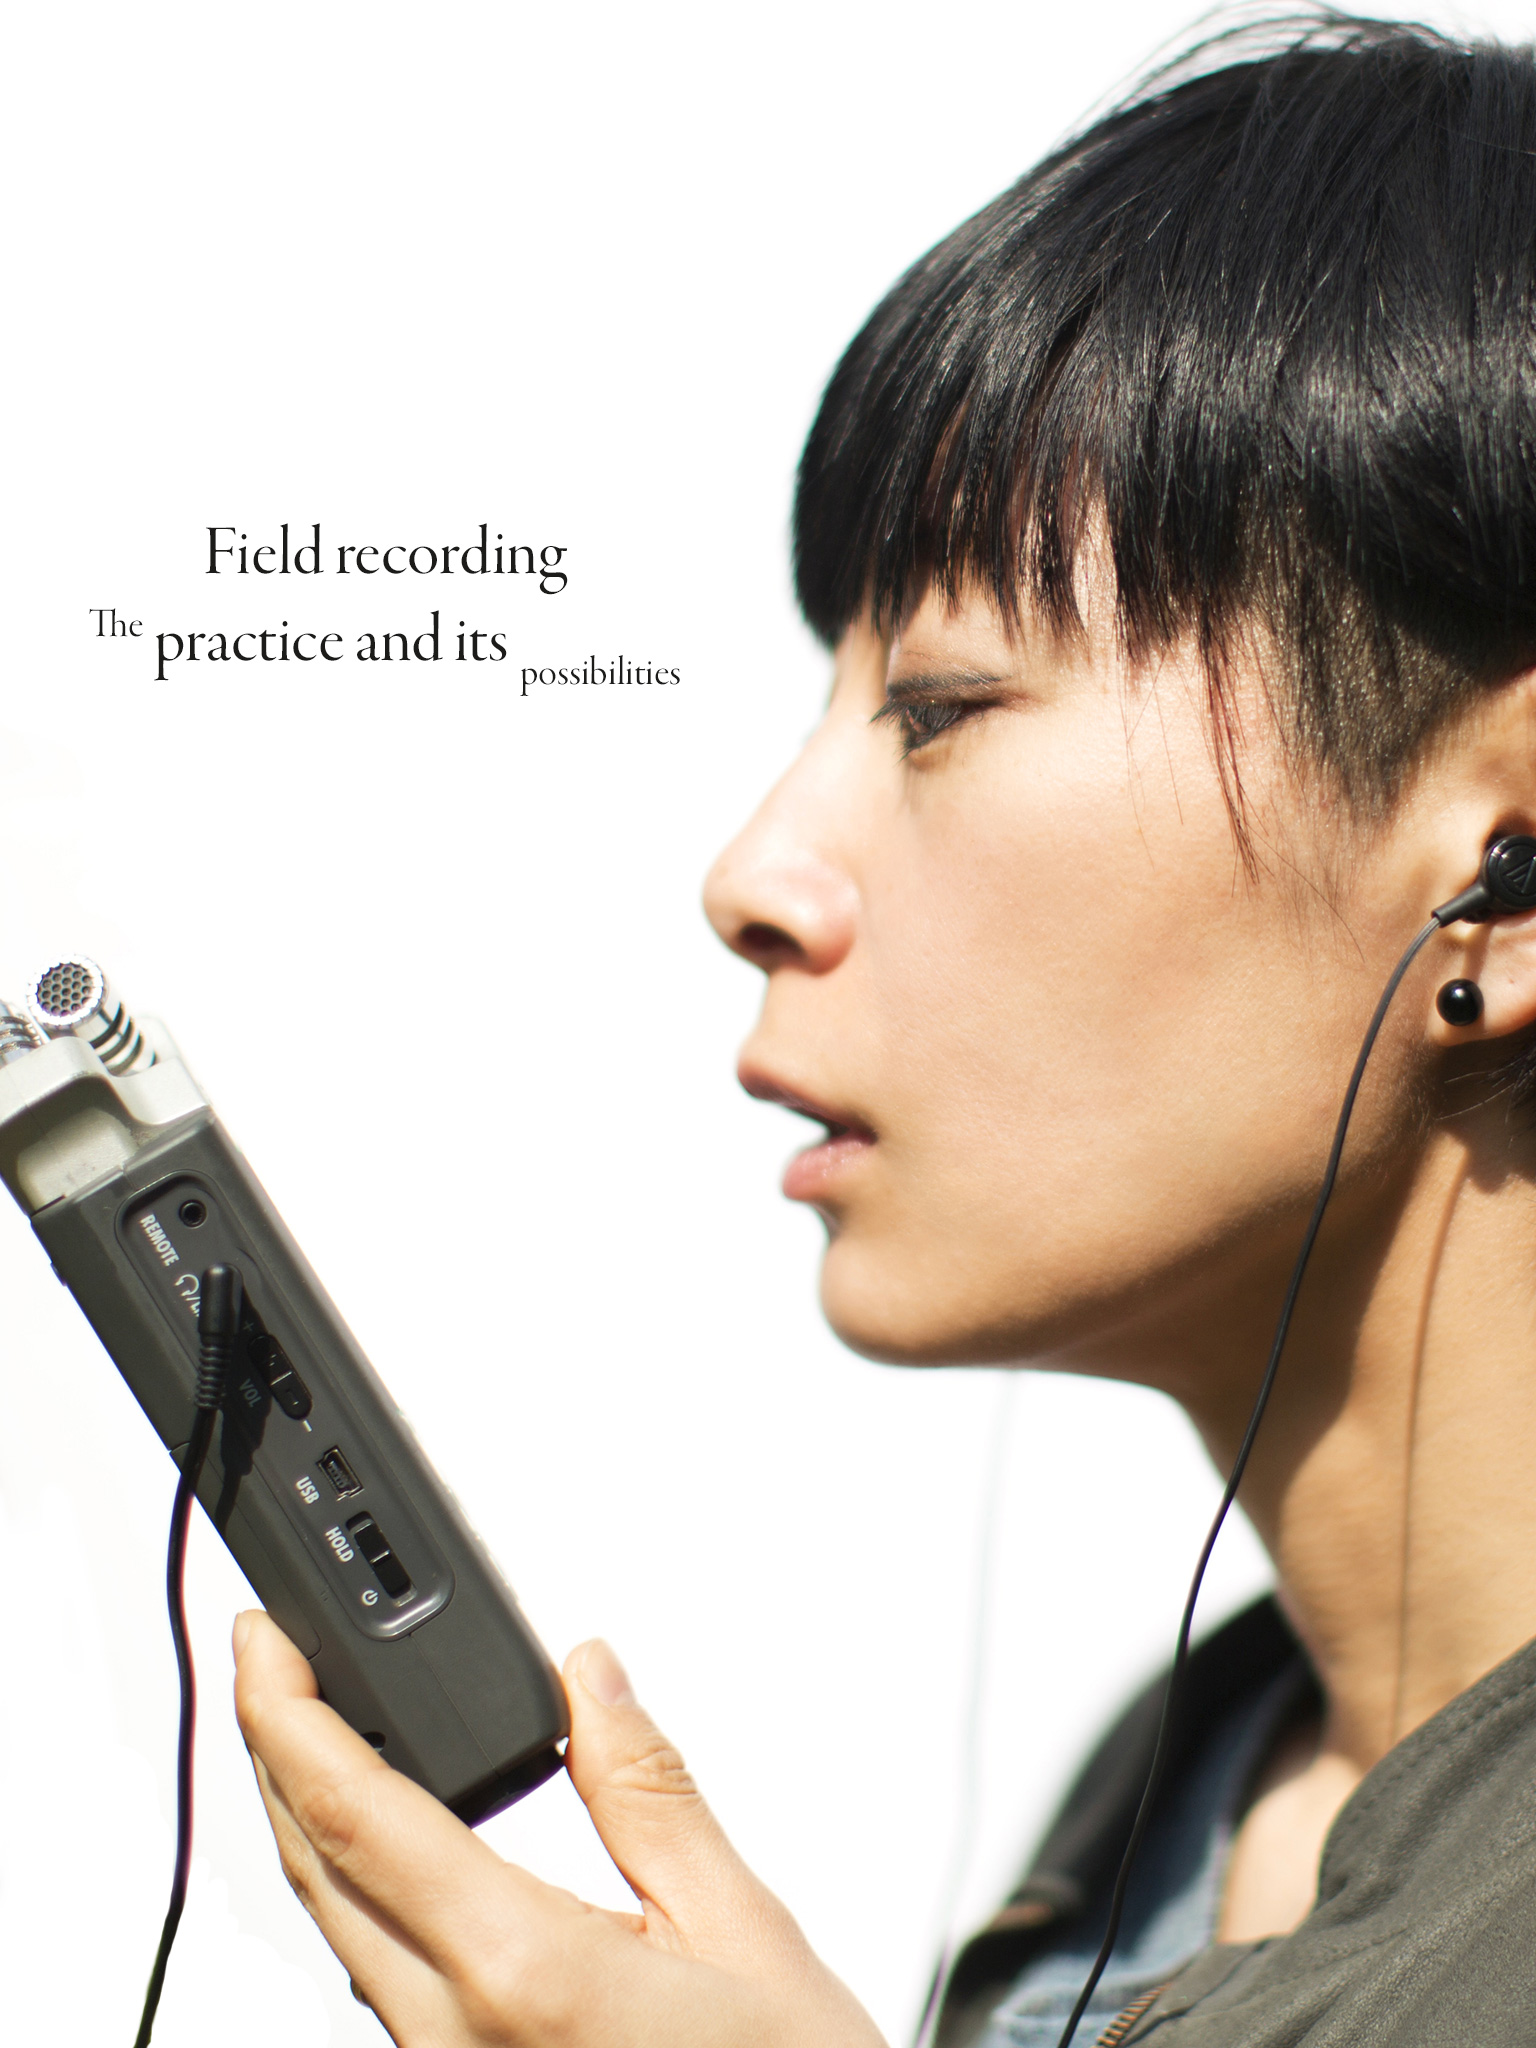 Field recording: The practice and its possibilities